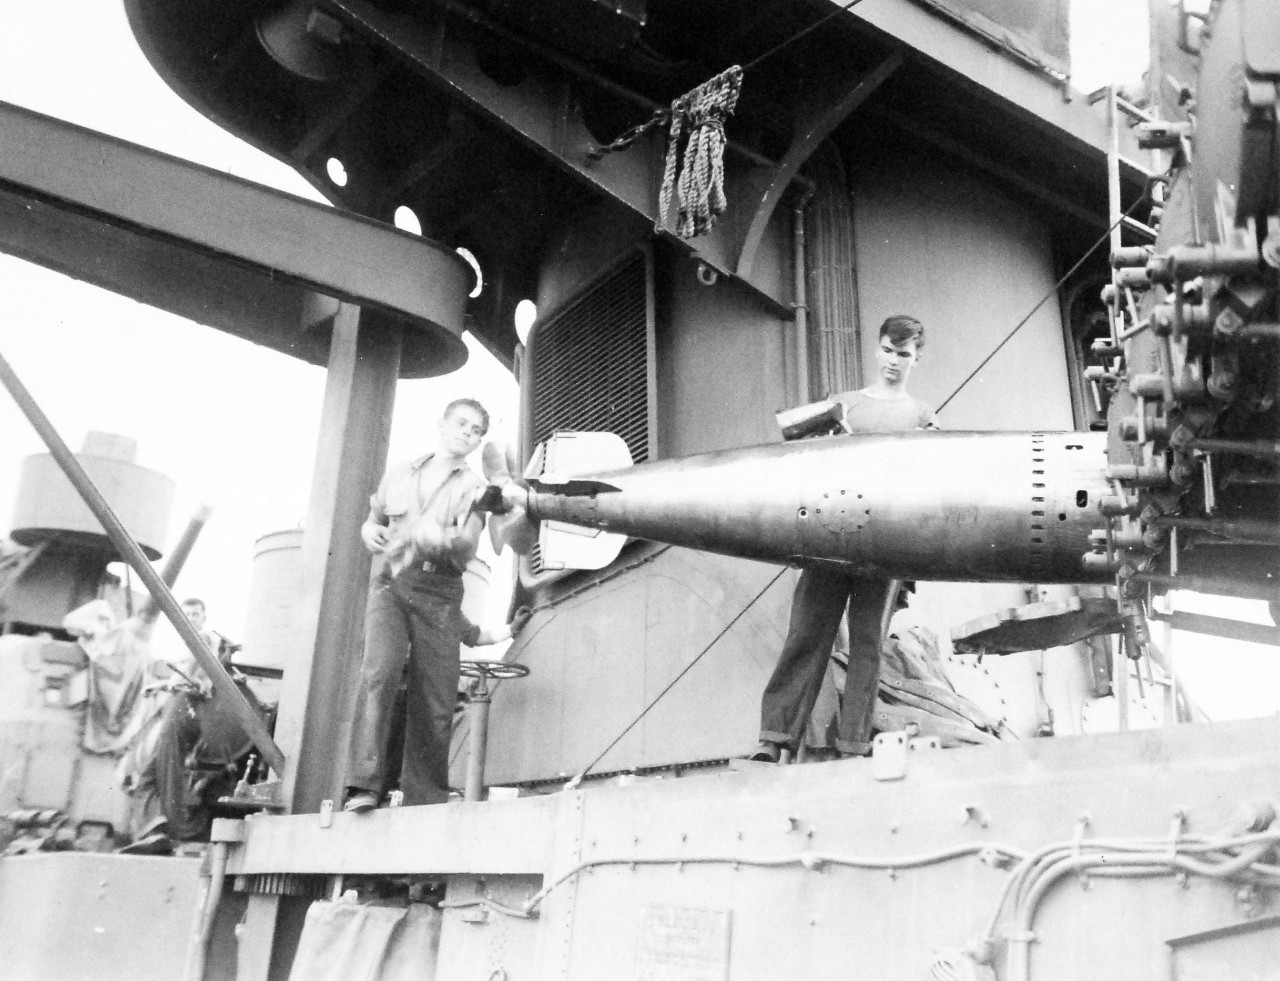 80-G-57602:  Battle of Kula Gulf, July -5-6, 1943.  Hoisting torpedoes on board USS Nicholas (DD-449) at Tulagi, after her others had been spent during the battle.   Photographed by CPU-2, July 12-13, 1943.   Official U.S. Navy Photograph, now in the collections of the National Archives.  (2016/6/2). 